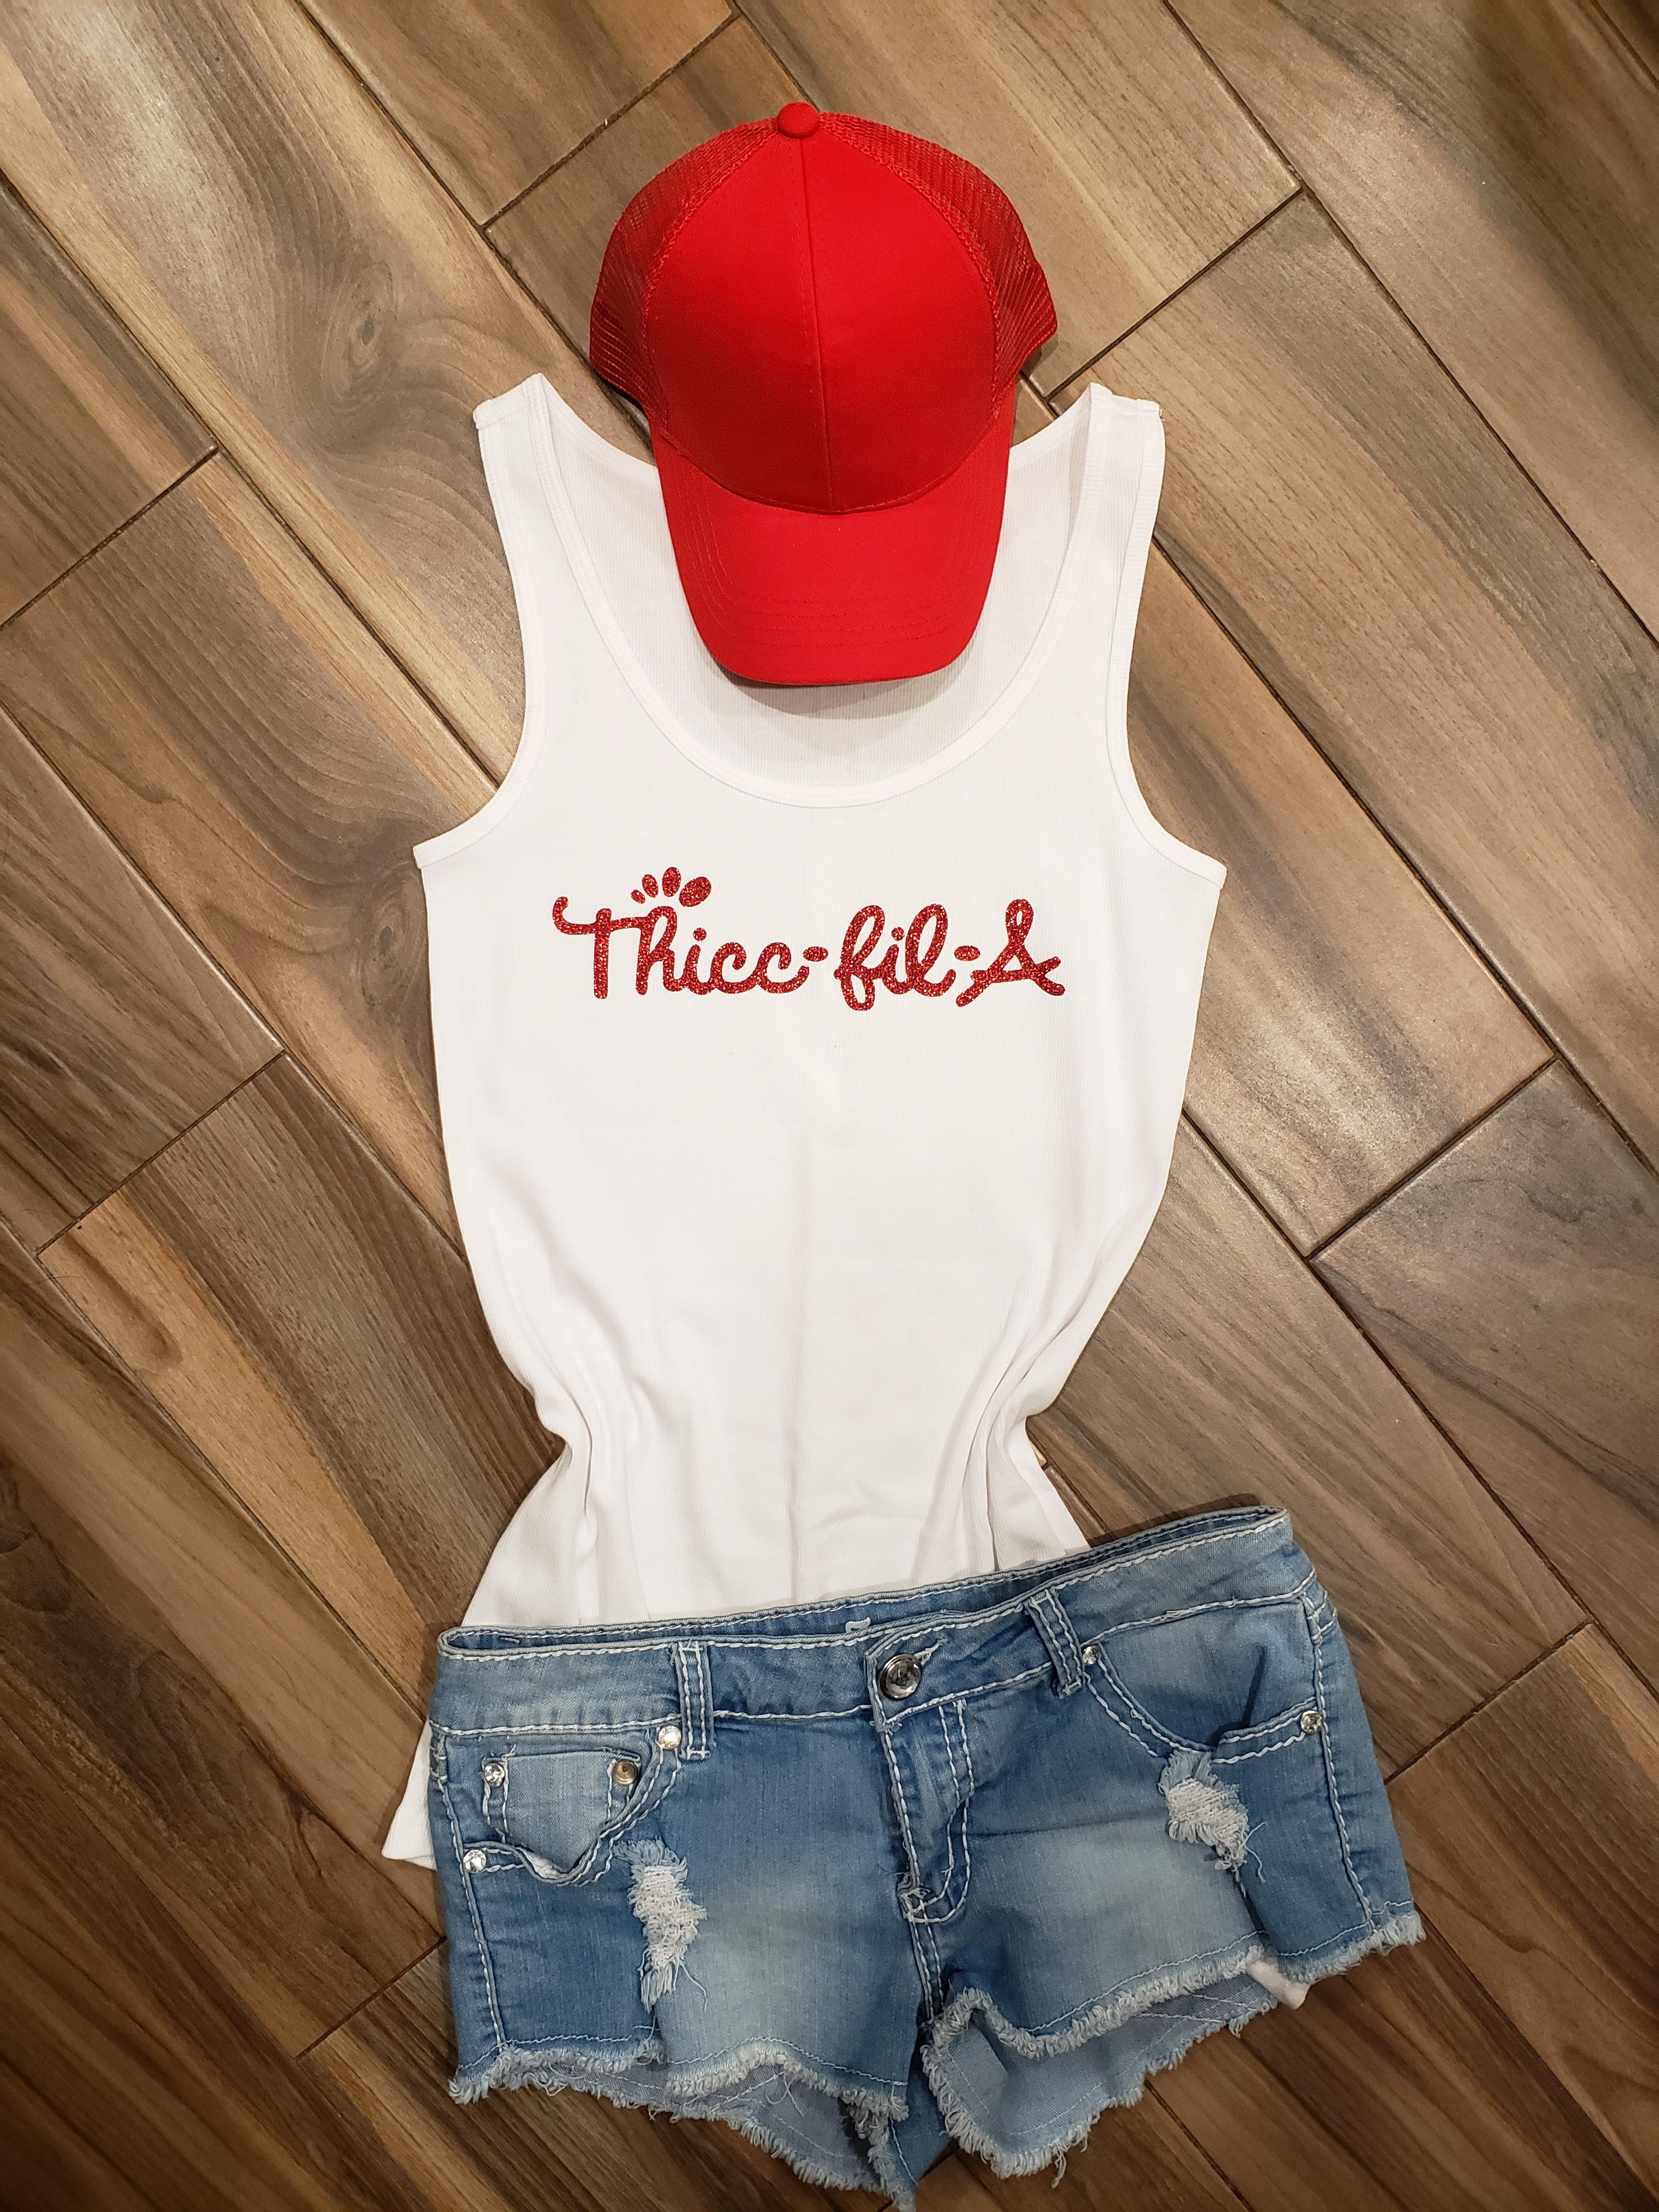 Thicc-Fil-A Top: Women's Fitness & Everyday Apparel – LuLu Grace